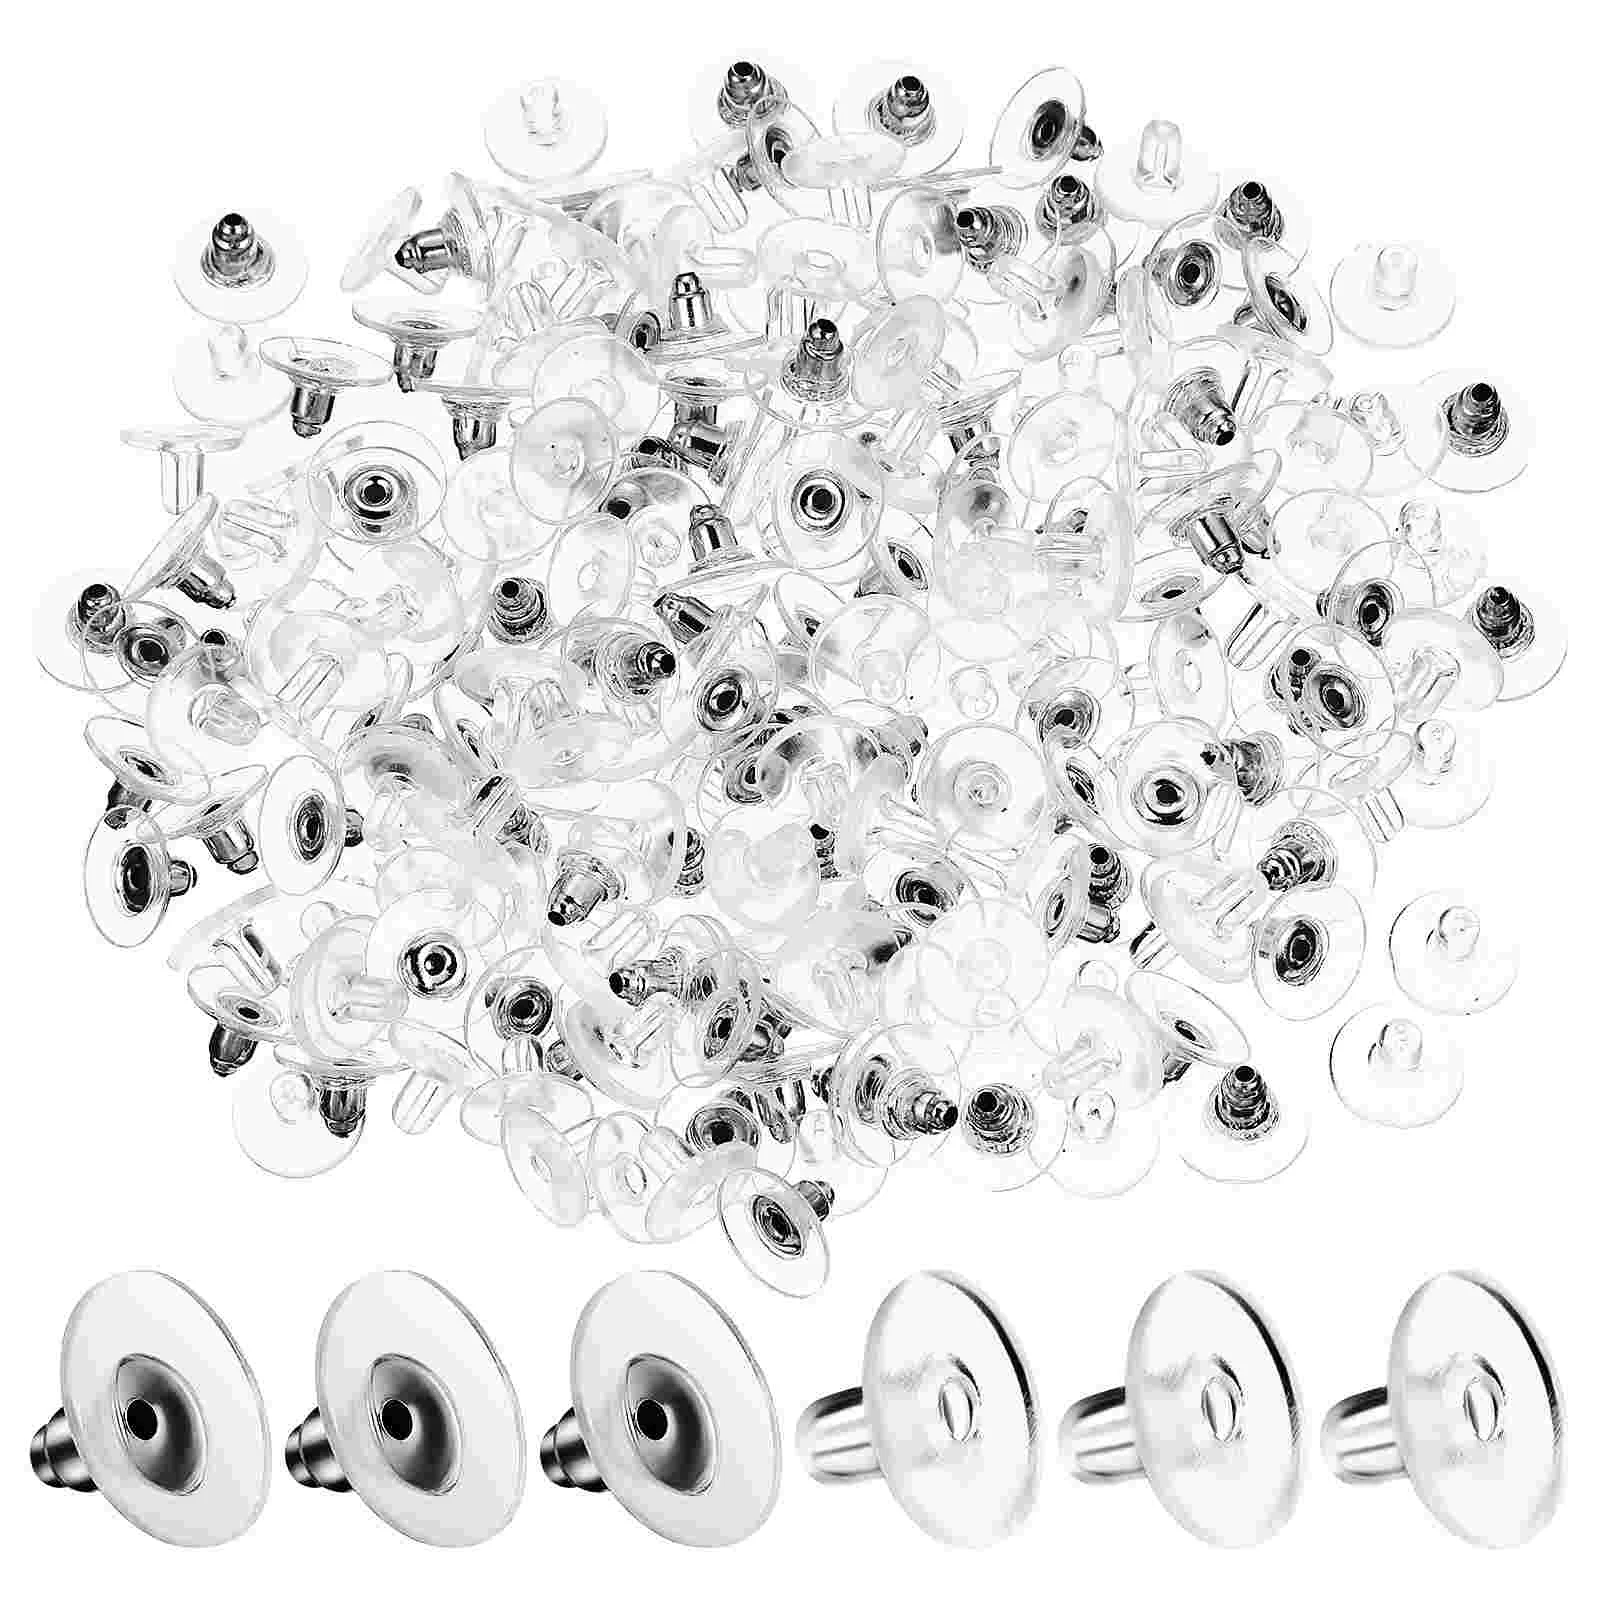 

200 Pcs Ear Rings Pierced Studs Back Heavy Earring Support Backs Replace Accessories For Findings Locking Stopper Parts Child